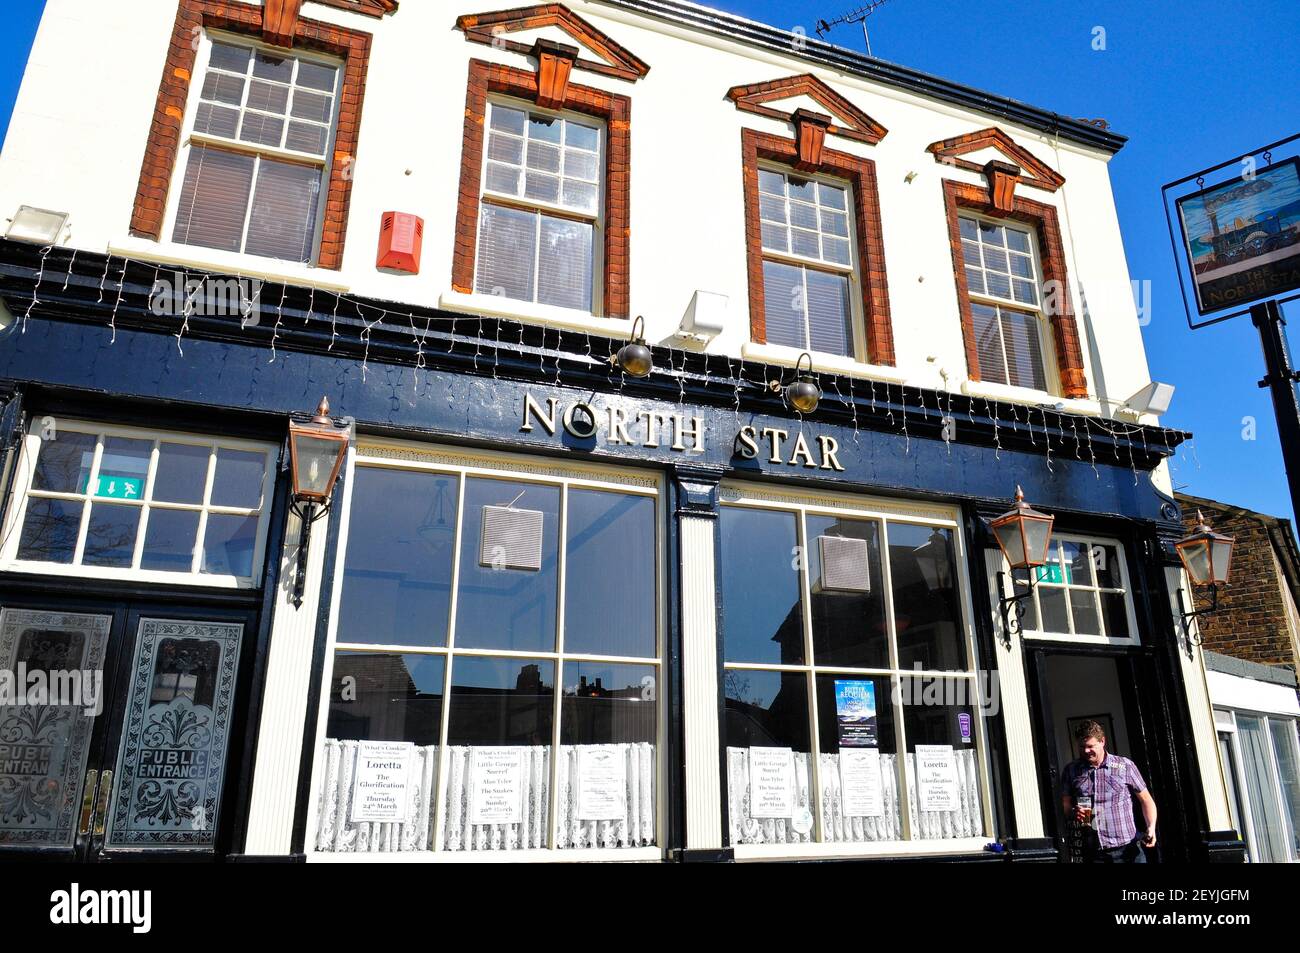 A man coming out of The North Star pub in Leytonstone, London, England Stock Photo